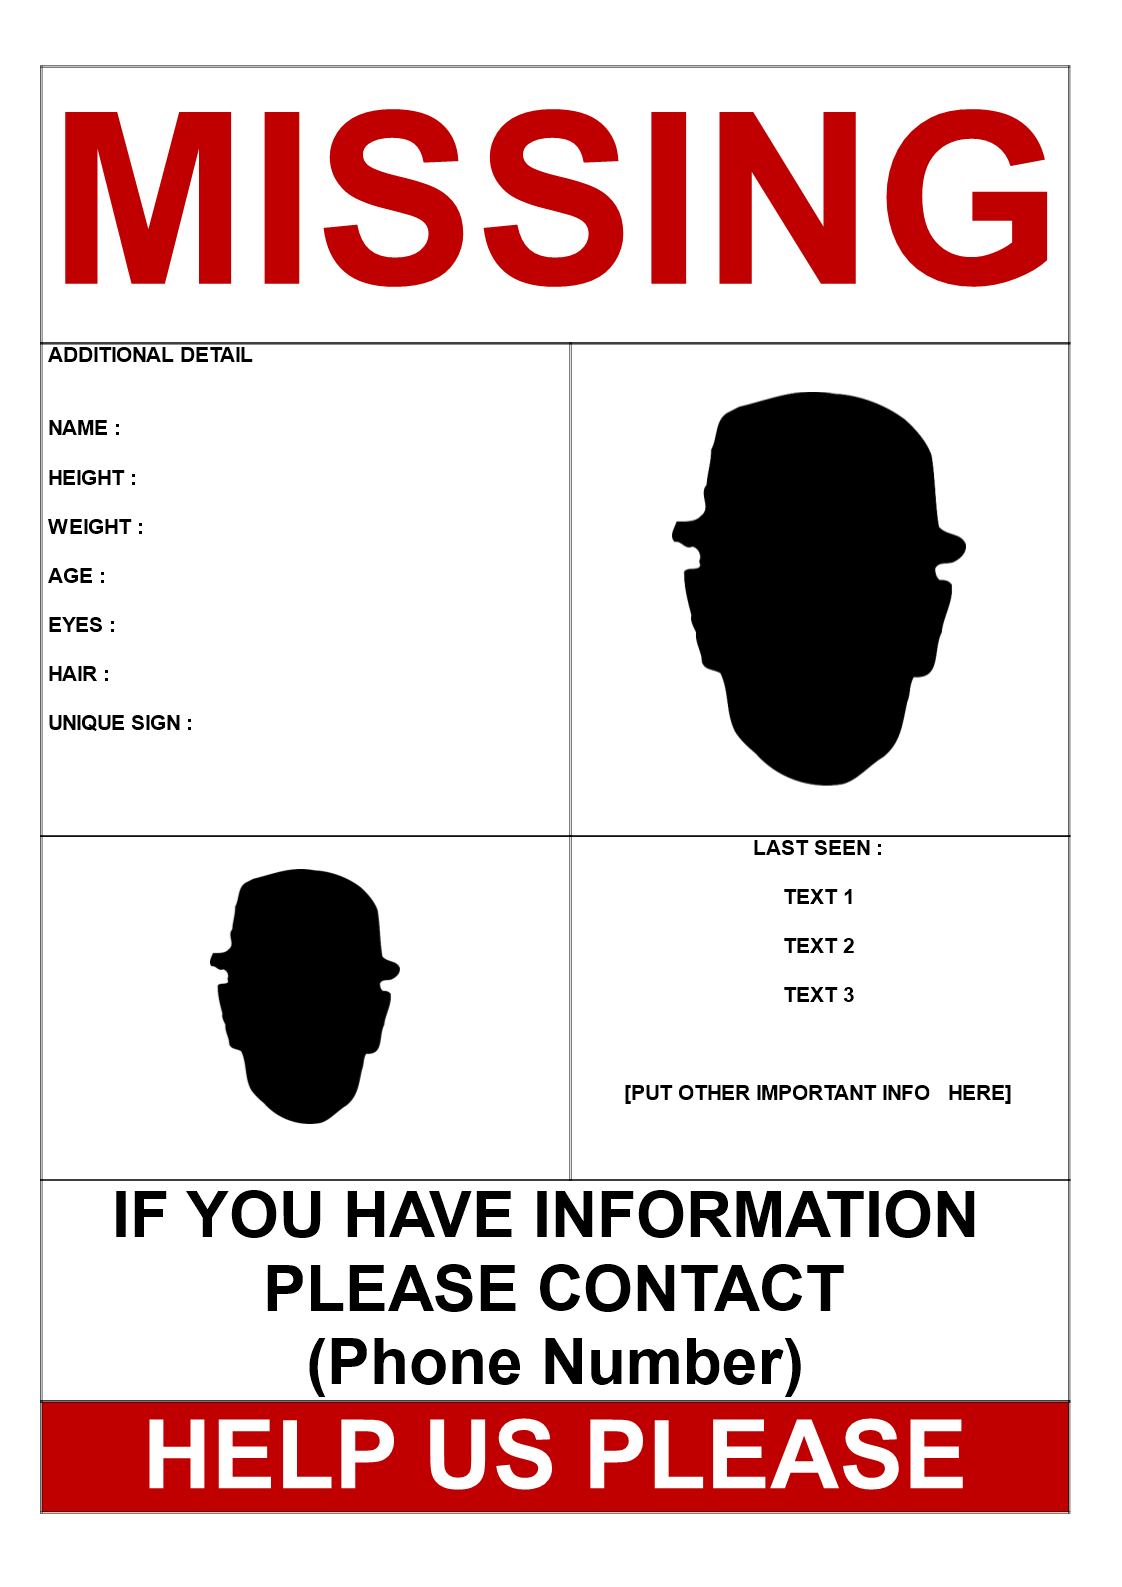 Missing Person Template 2 pictures Templates at allbusinesstemplates com